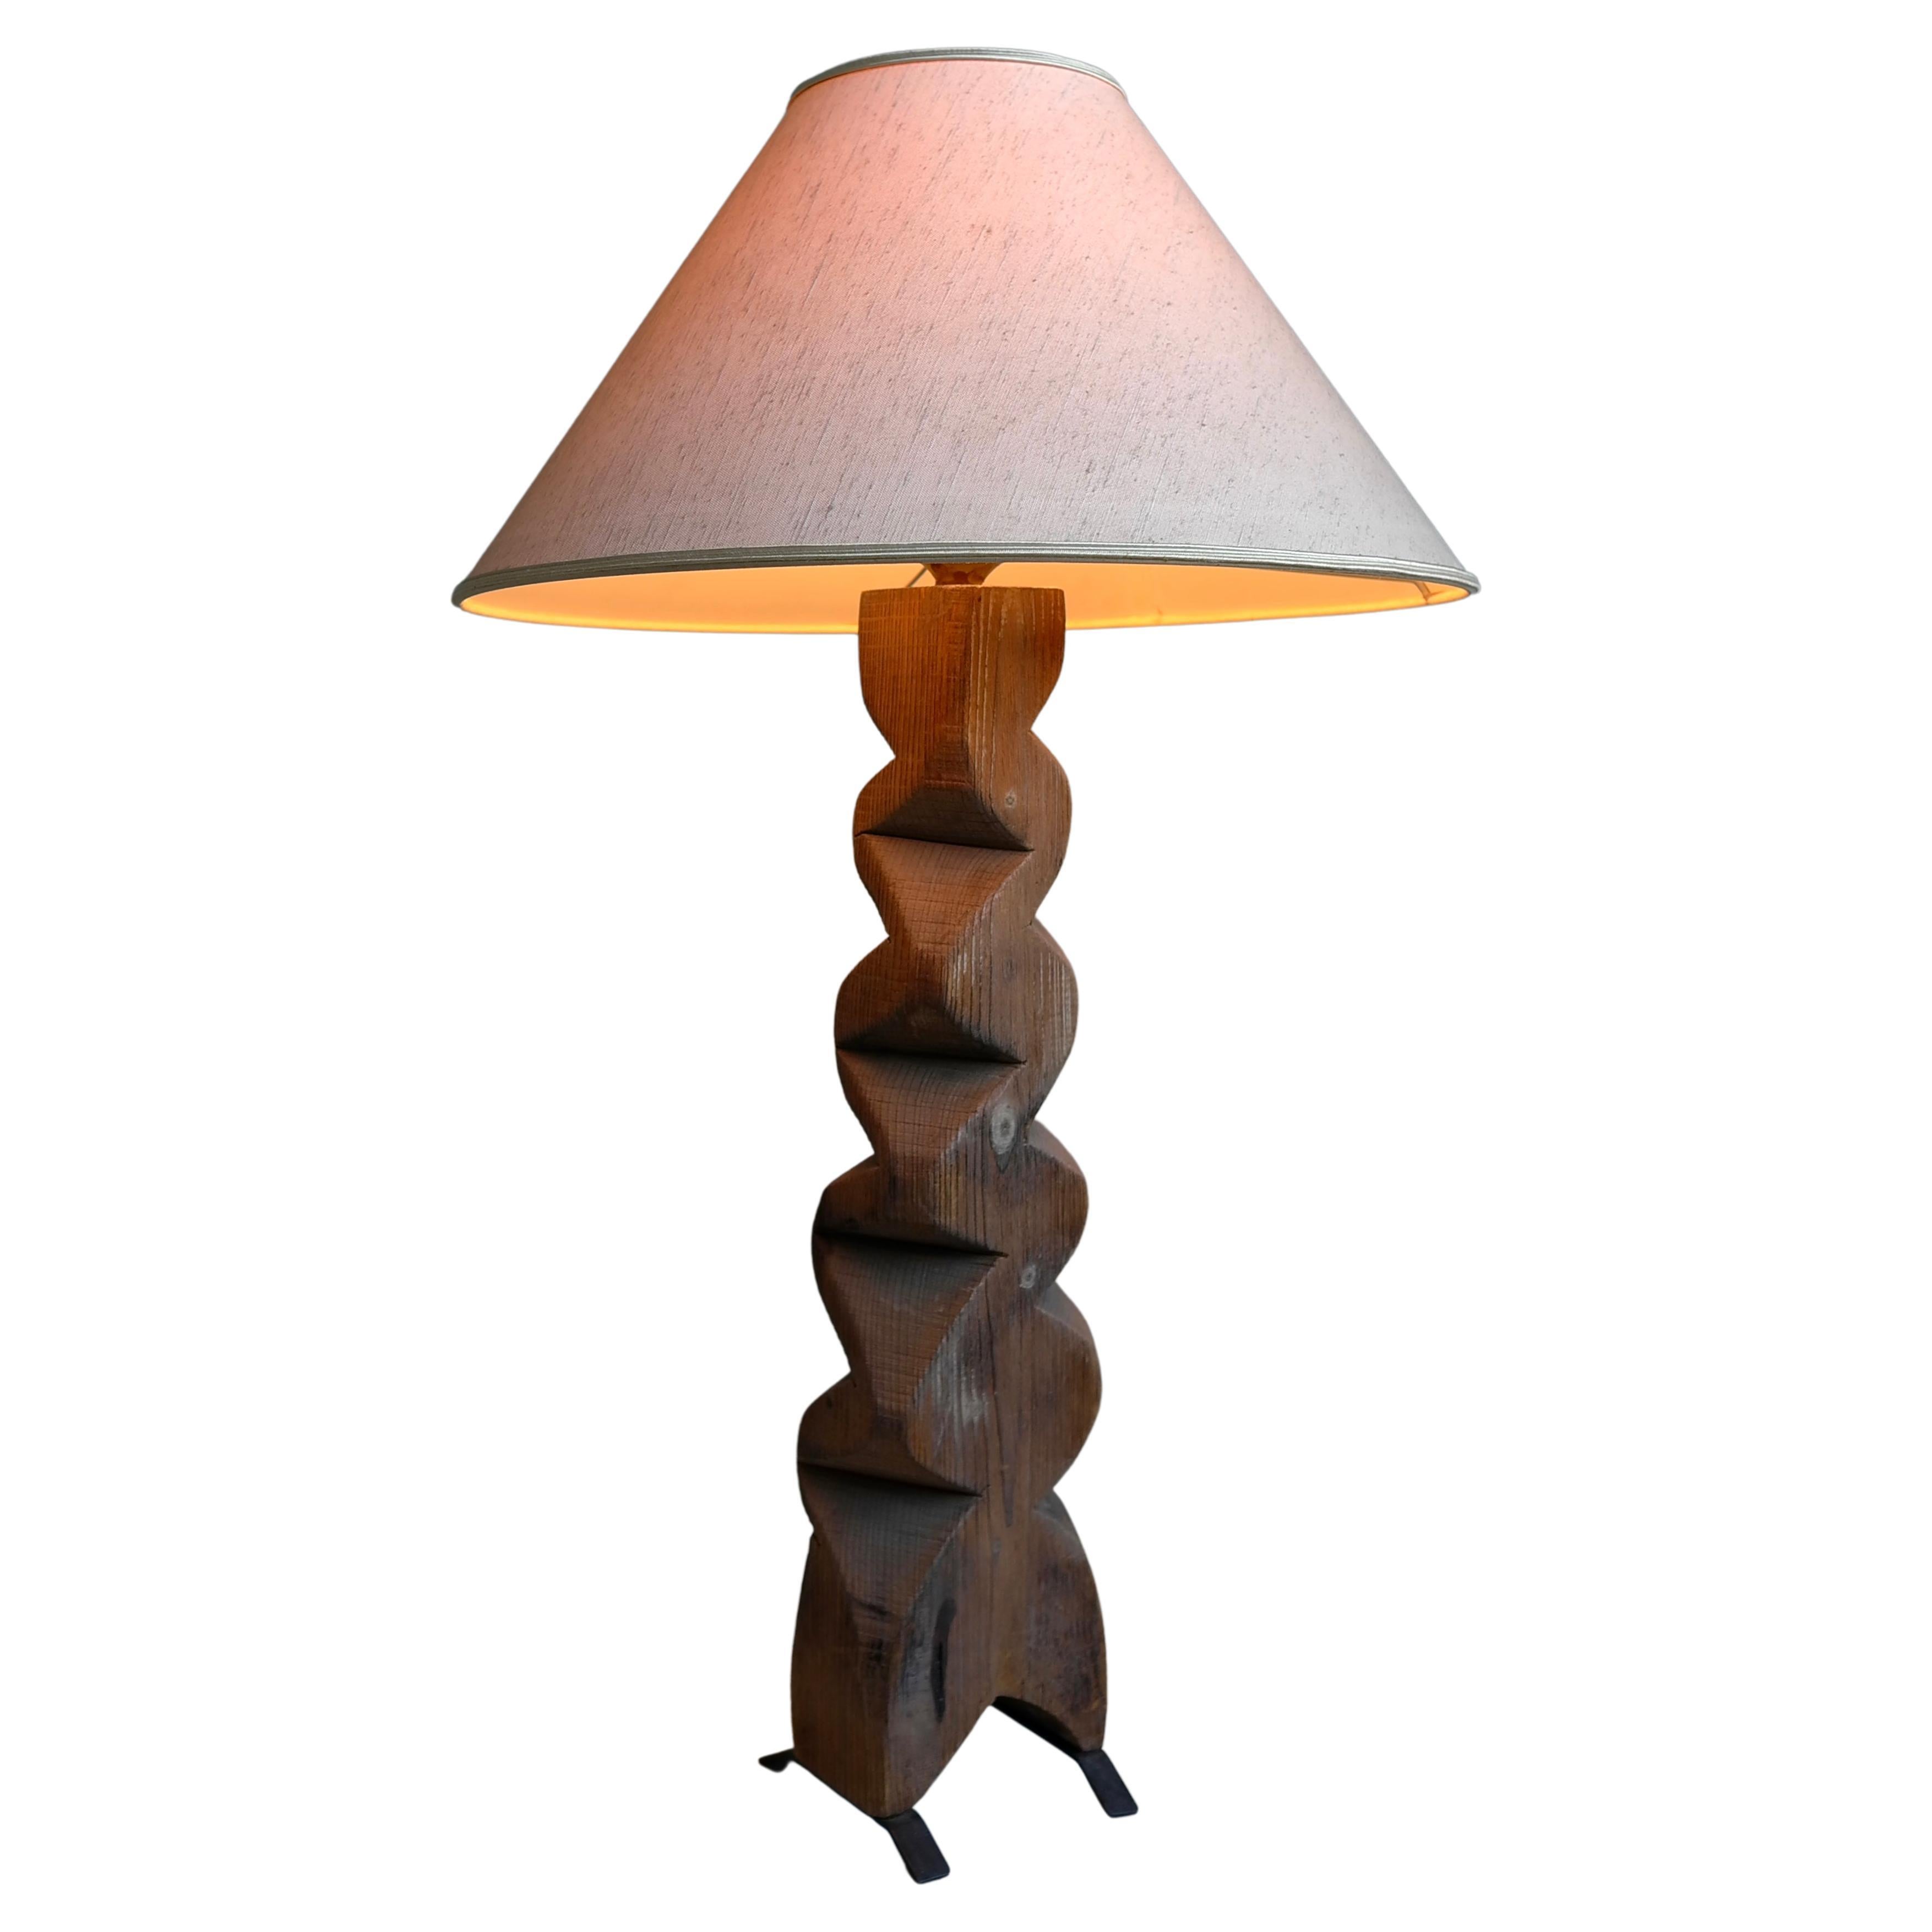 Large Mid-Century Modern Wooden Sculpture Table Lamp, off White Silk Shade, 1965 For Sale